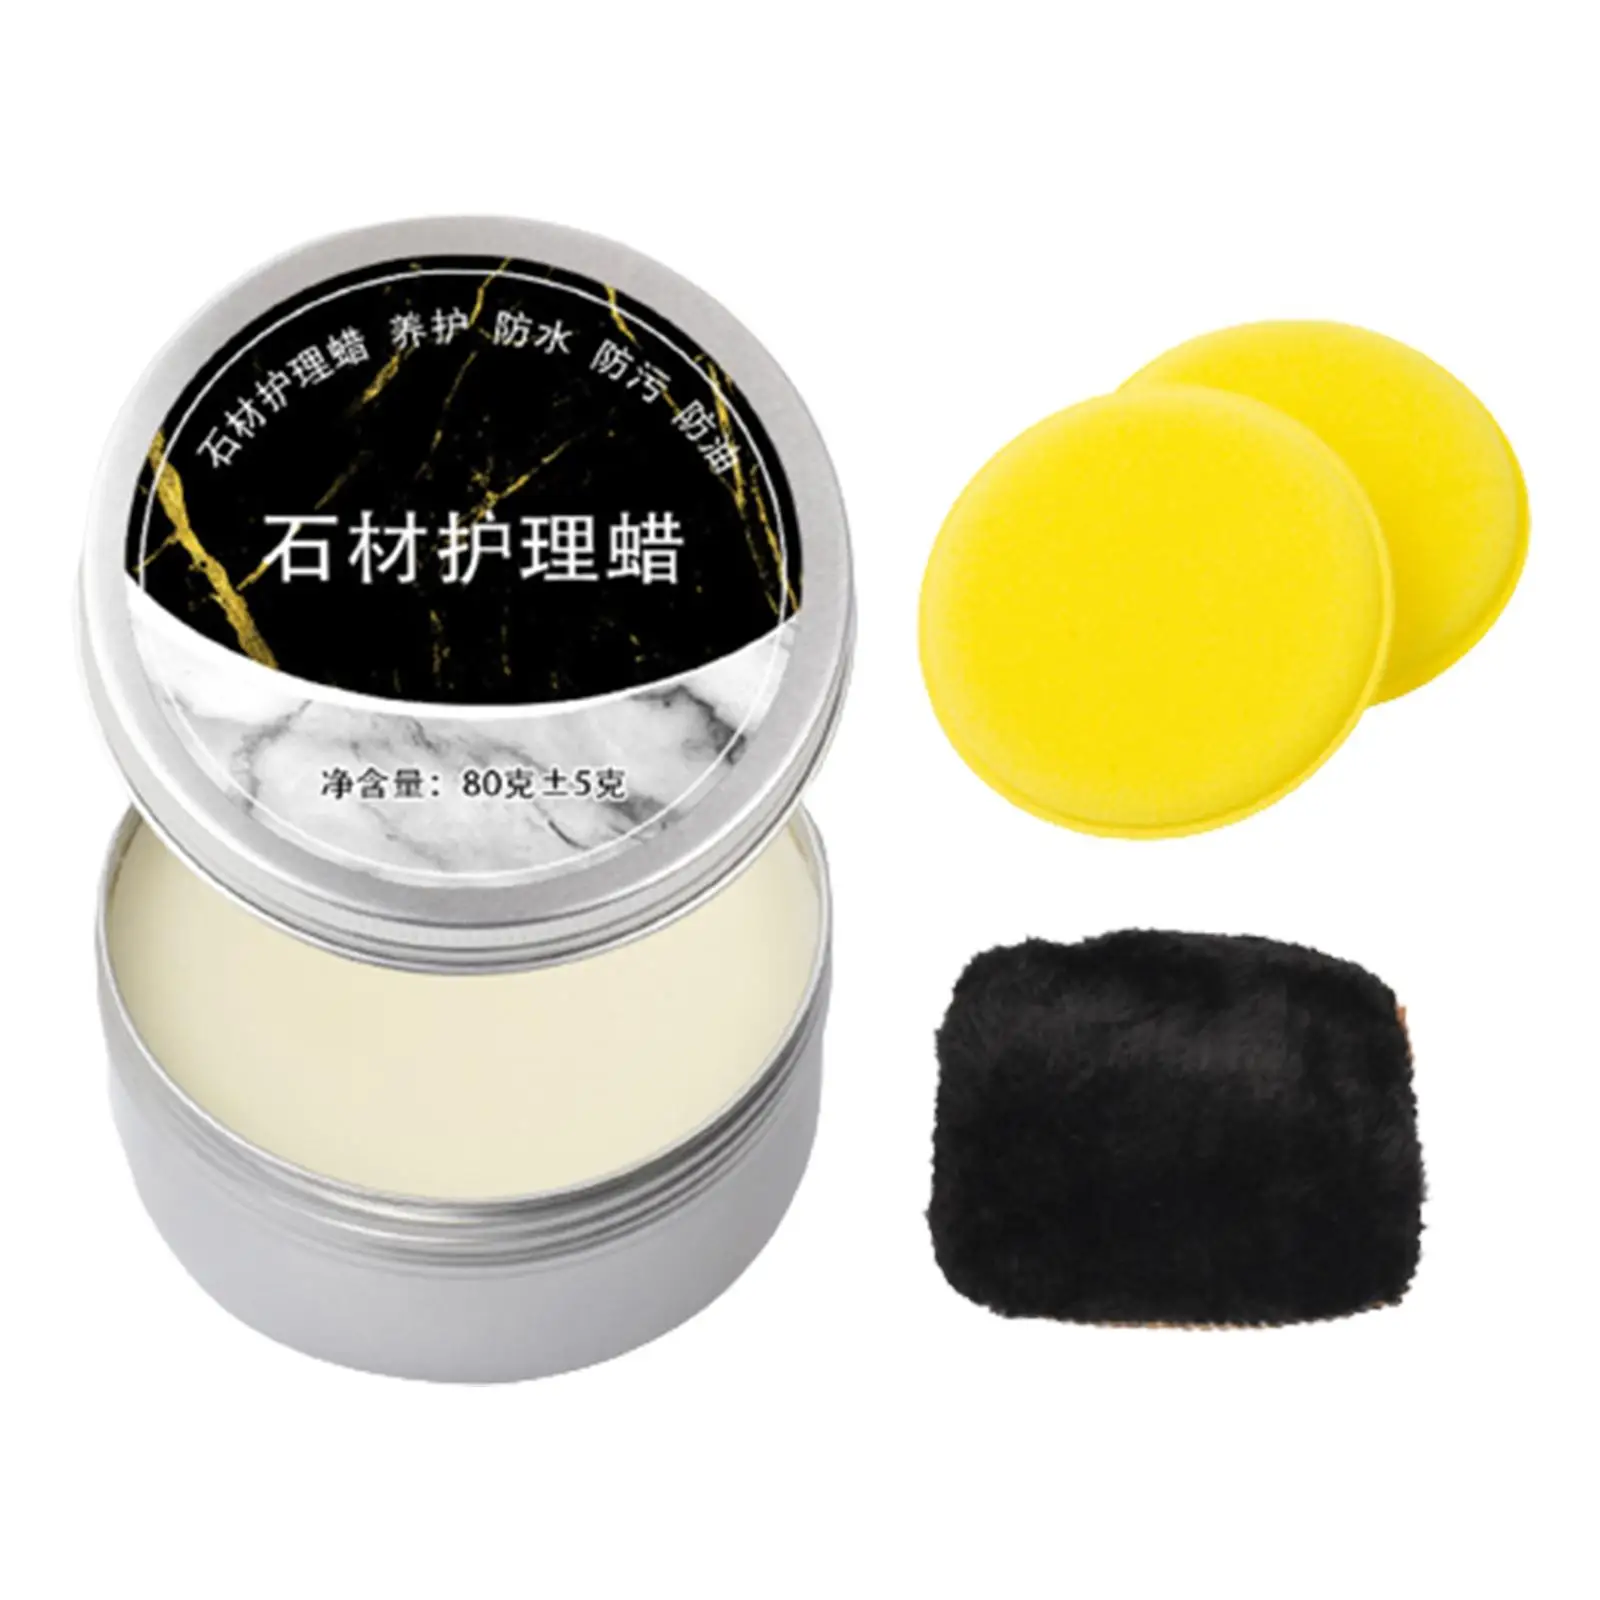 Beeswax Polish for Wood Furniture 80G Waterproof Home Cleaning Wood Seasoning Beewax for Marble Floors Chairs Kitchen Cabinets